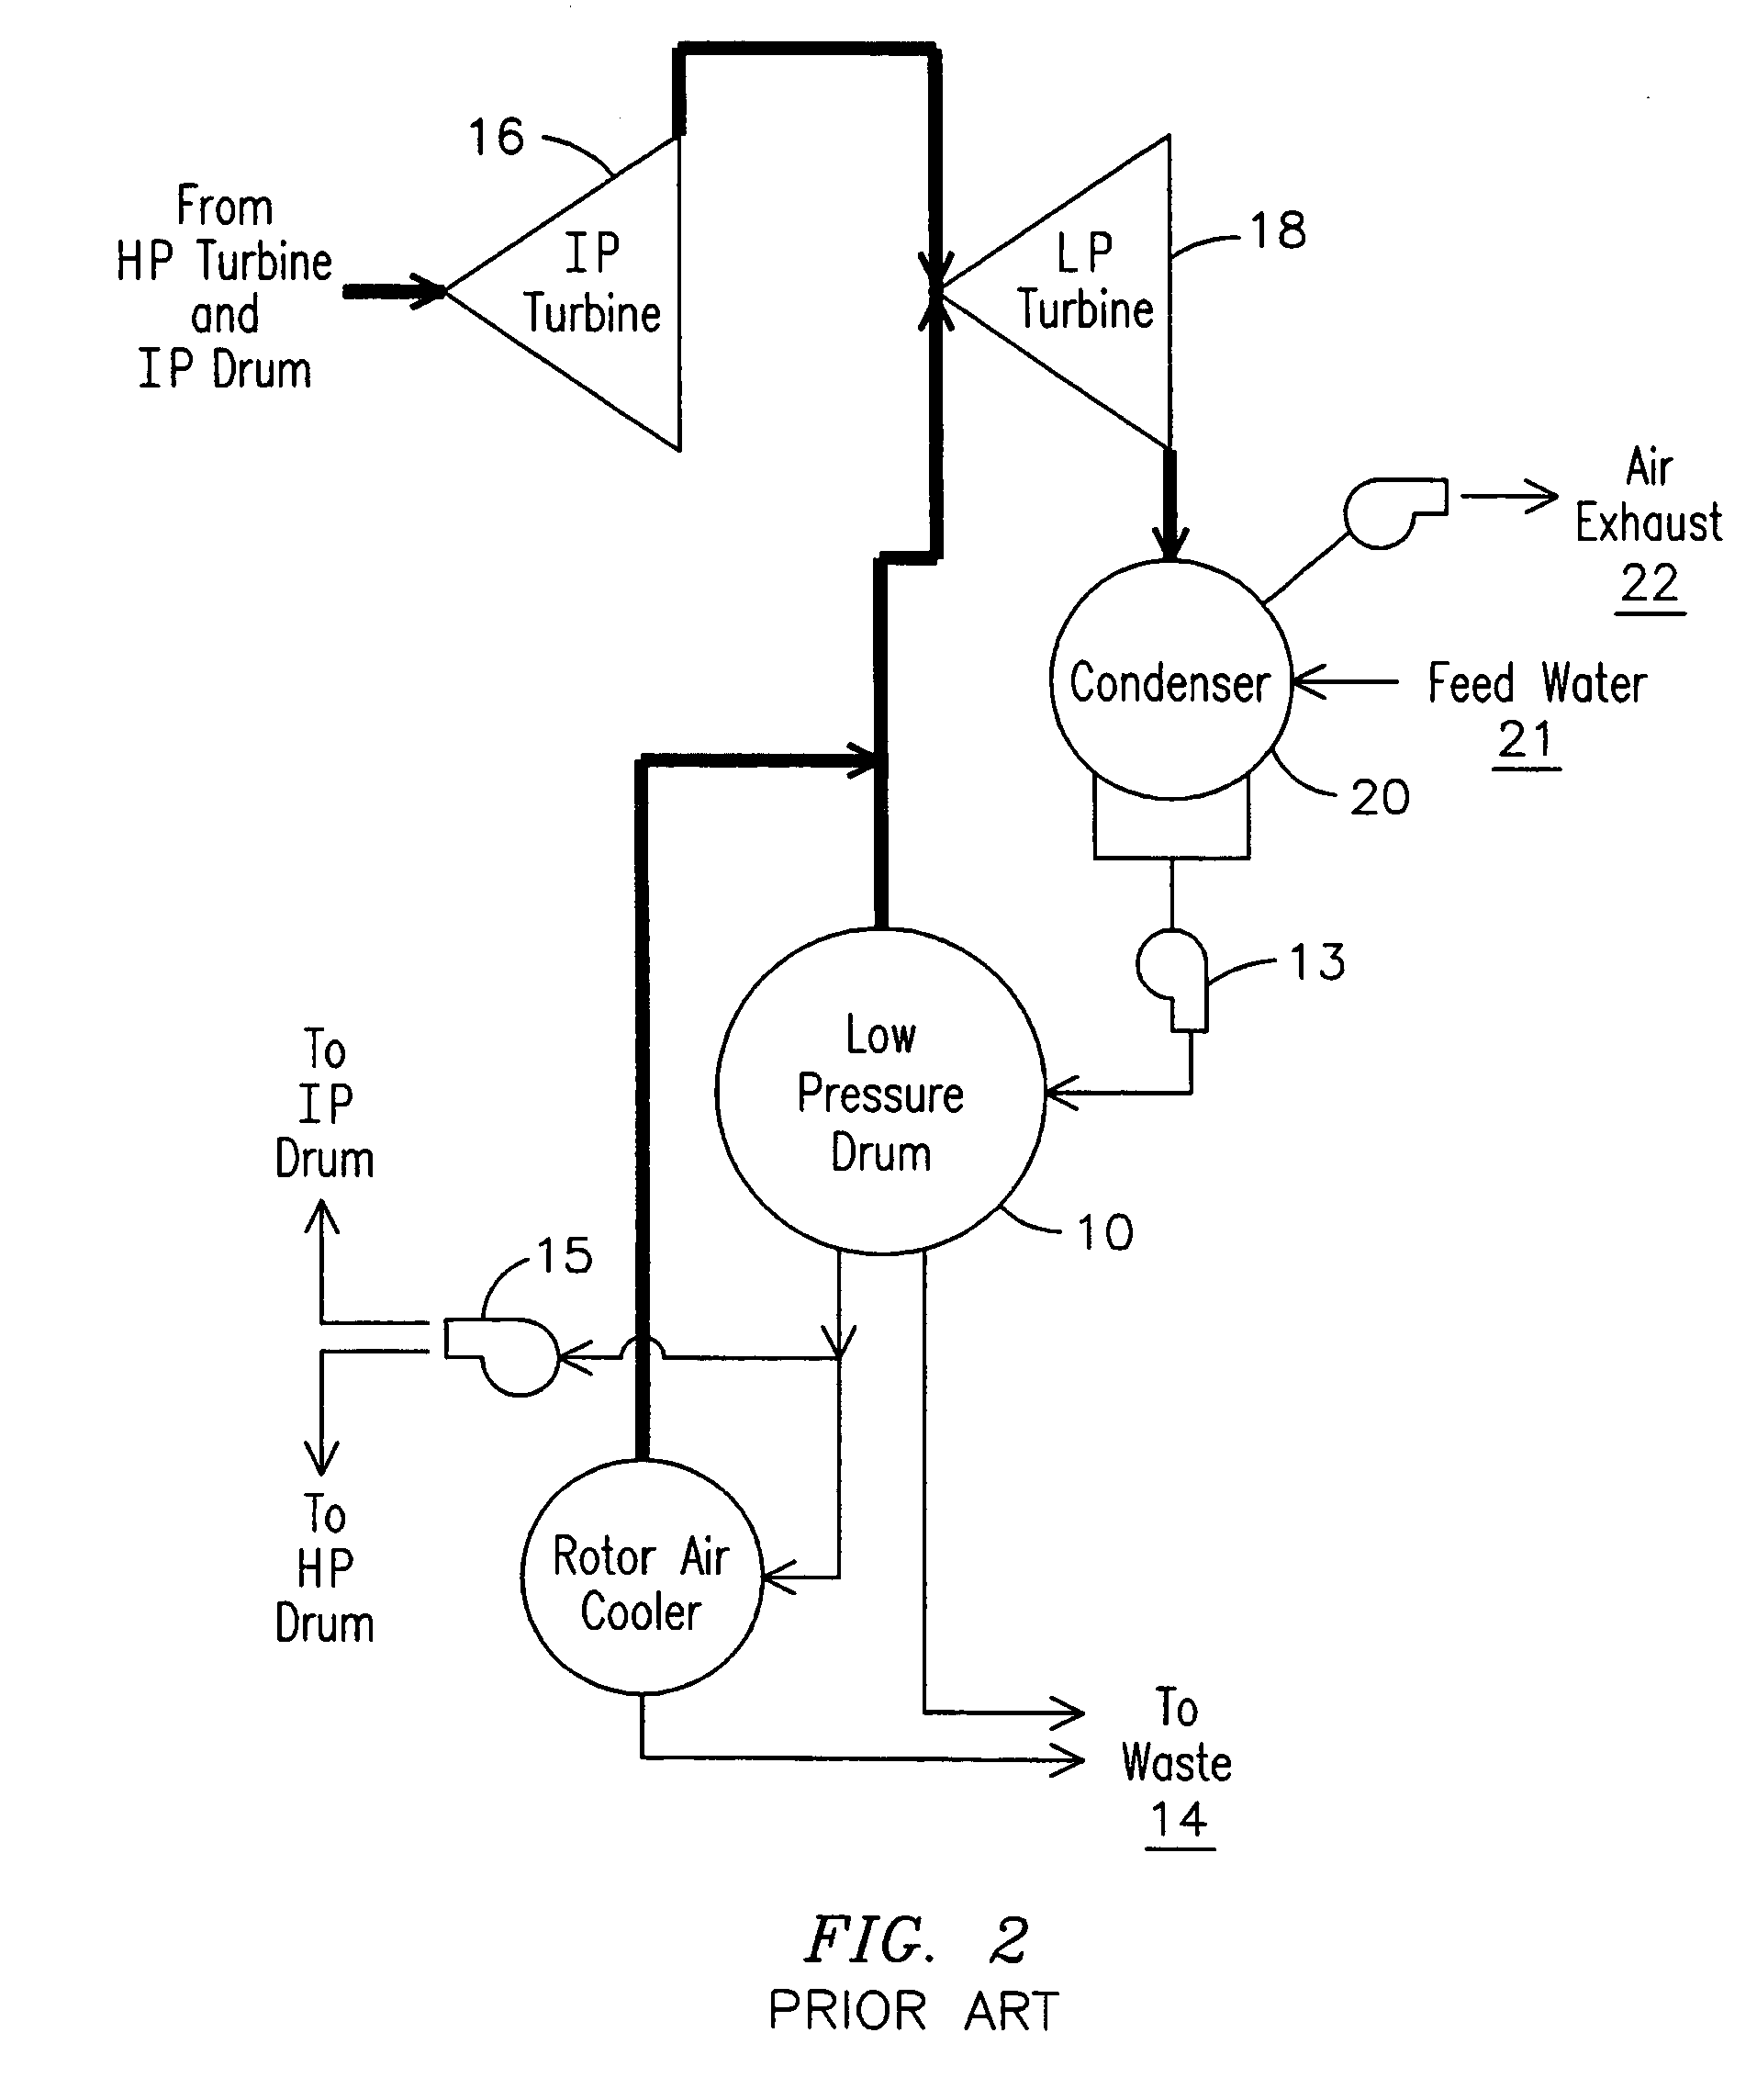 Condensing deaerating vent line for steam generating systems